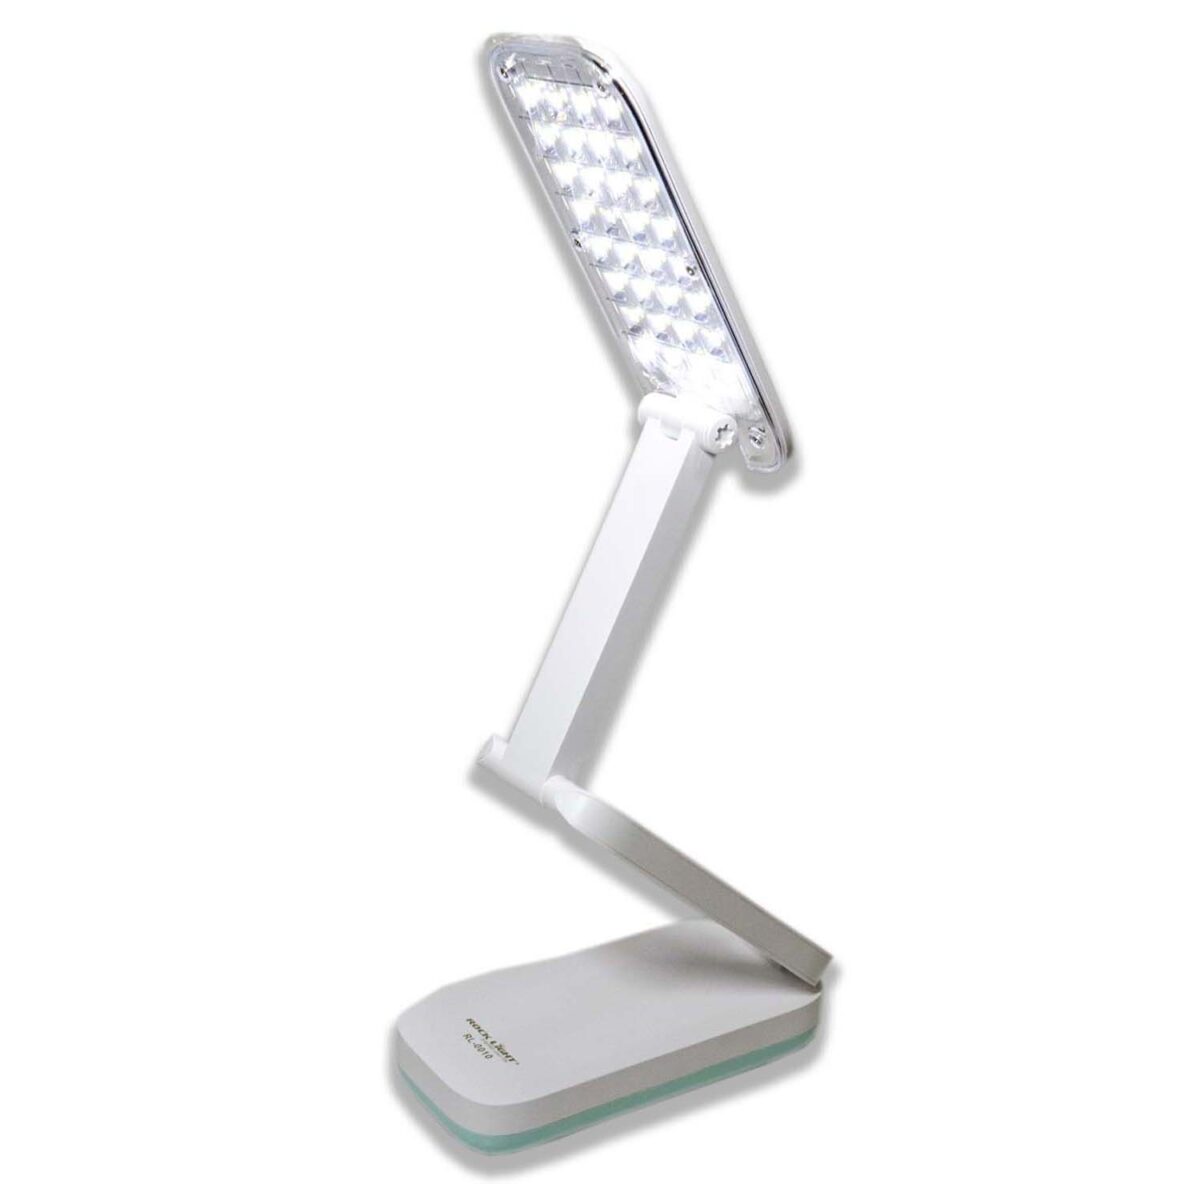 Smuf Fully Adjustable Lamp For Study High Brightness With 8 Hours Long Battery Backup Table Lamp